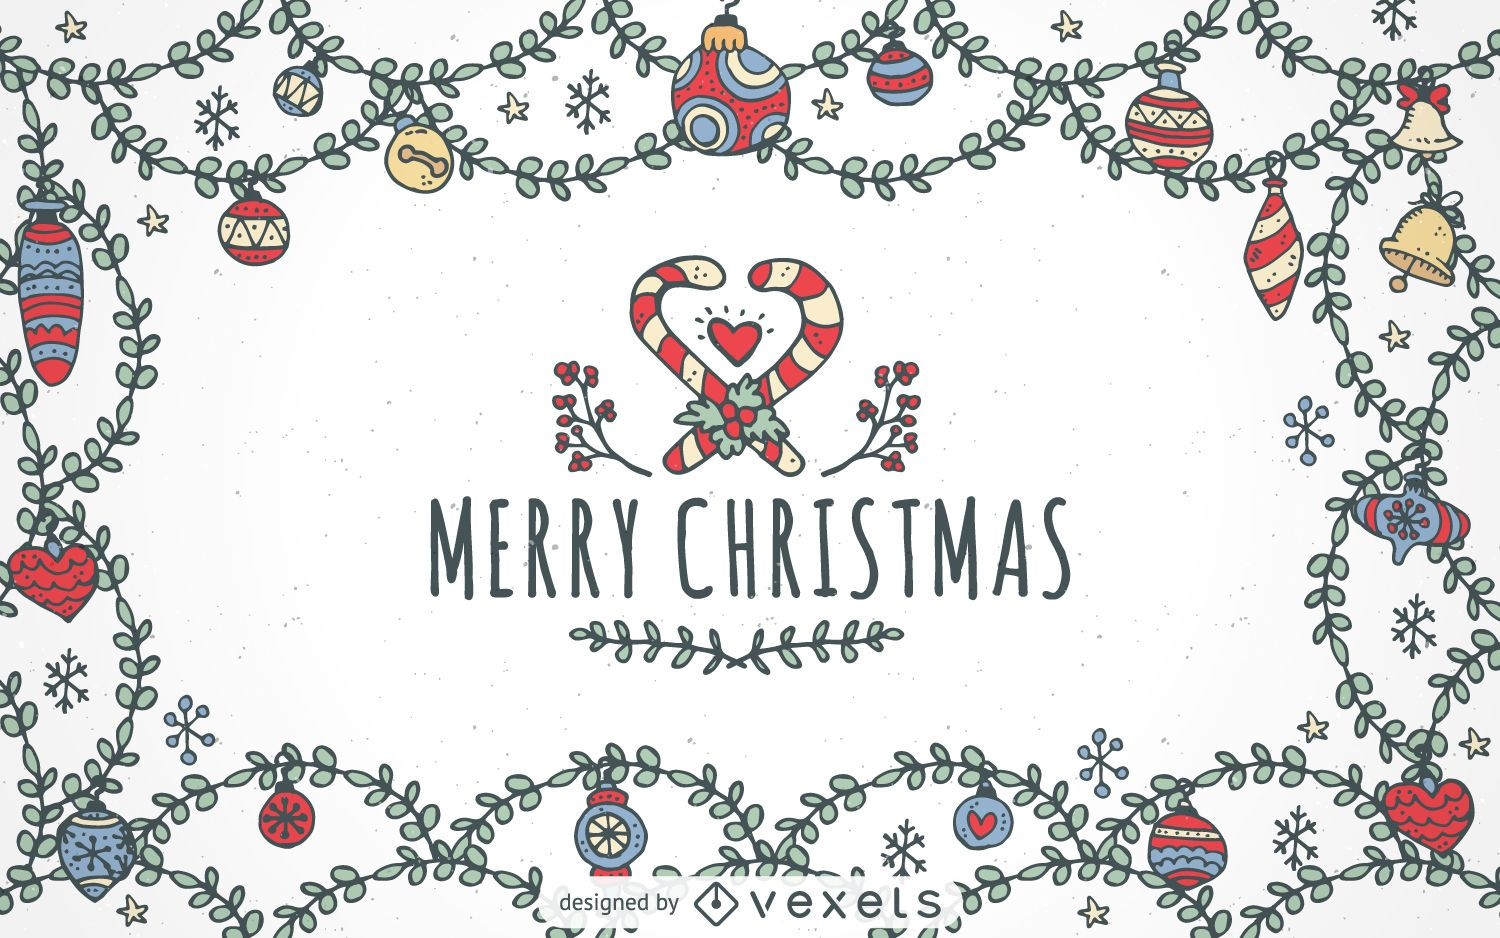 Hand drawn Merry Christmas ornaments background